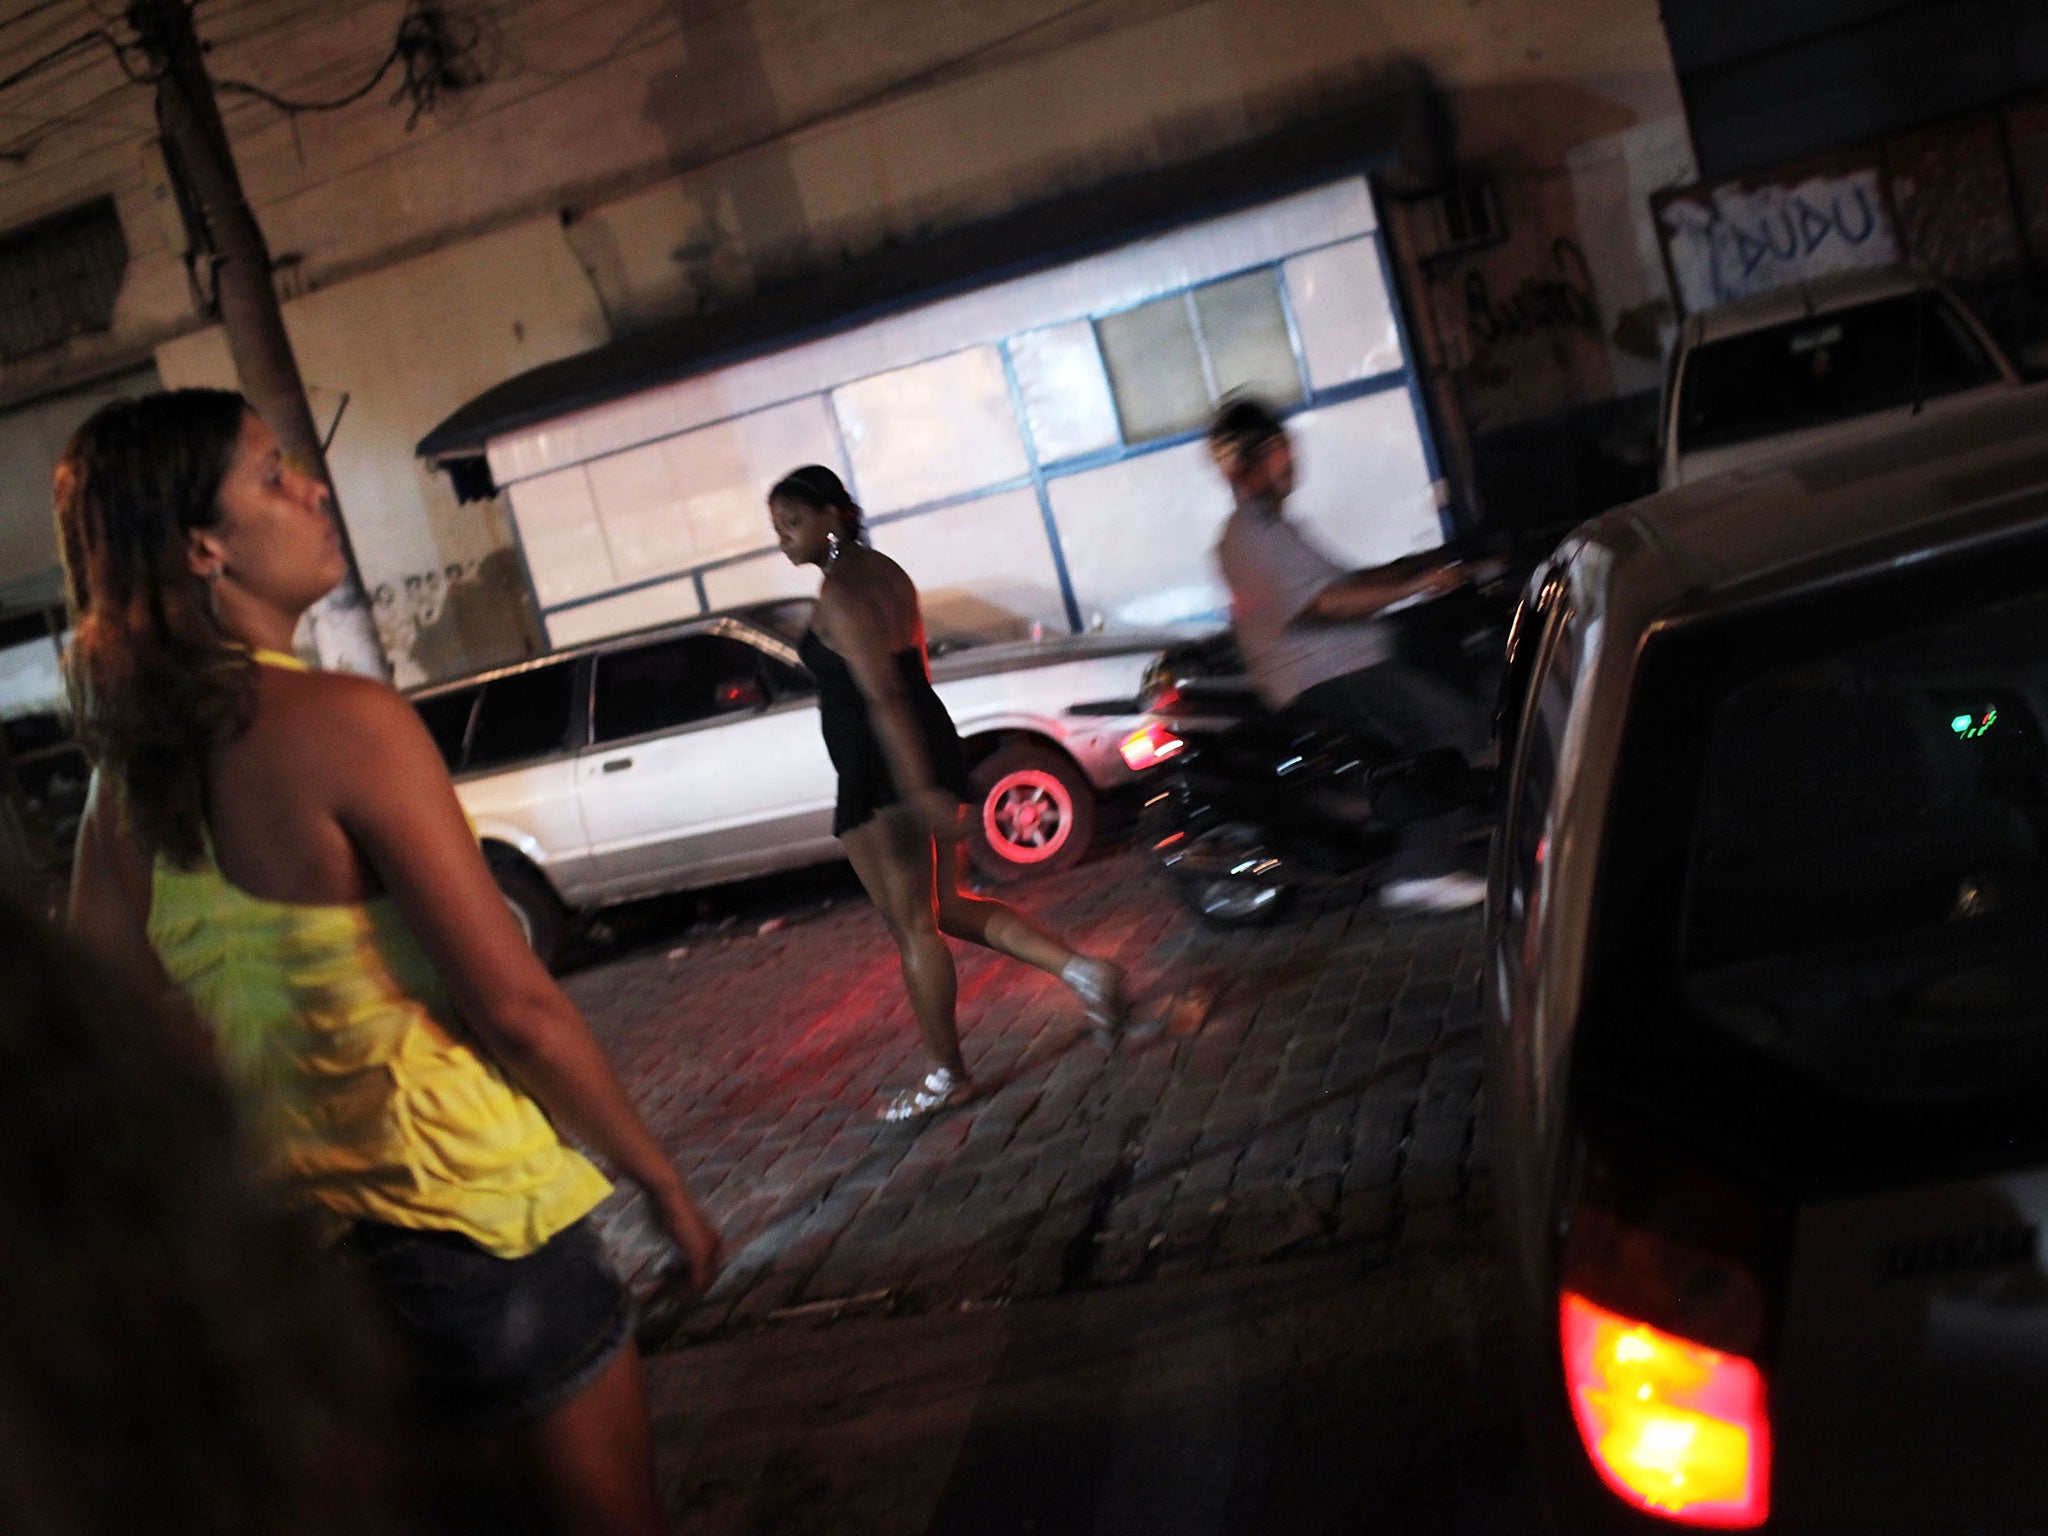 About half a million minors are thought to sell their bodies in Brazil